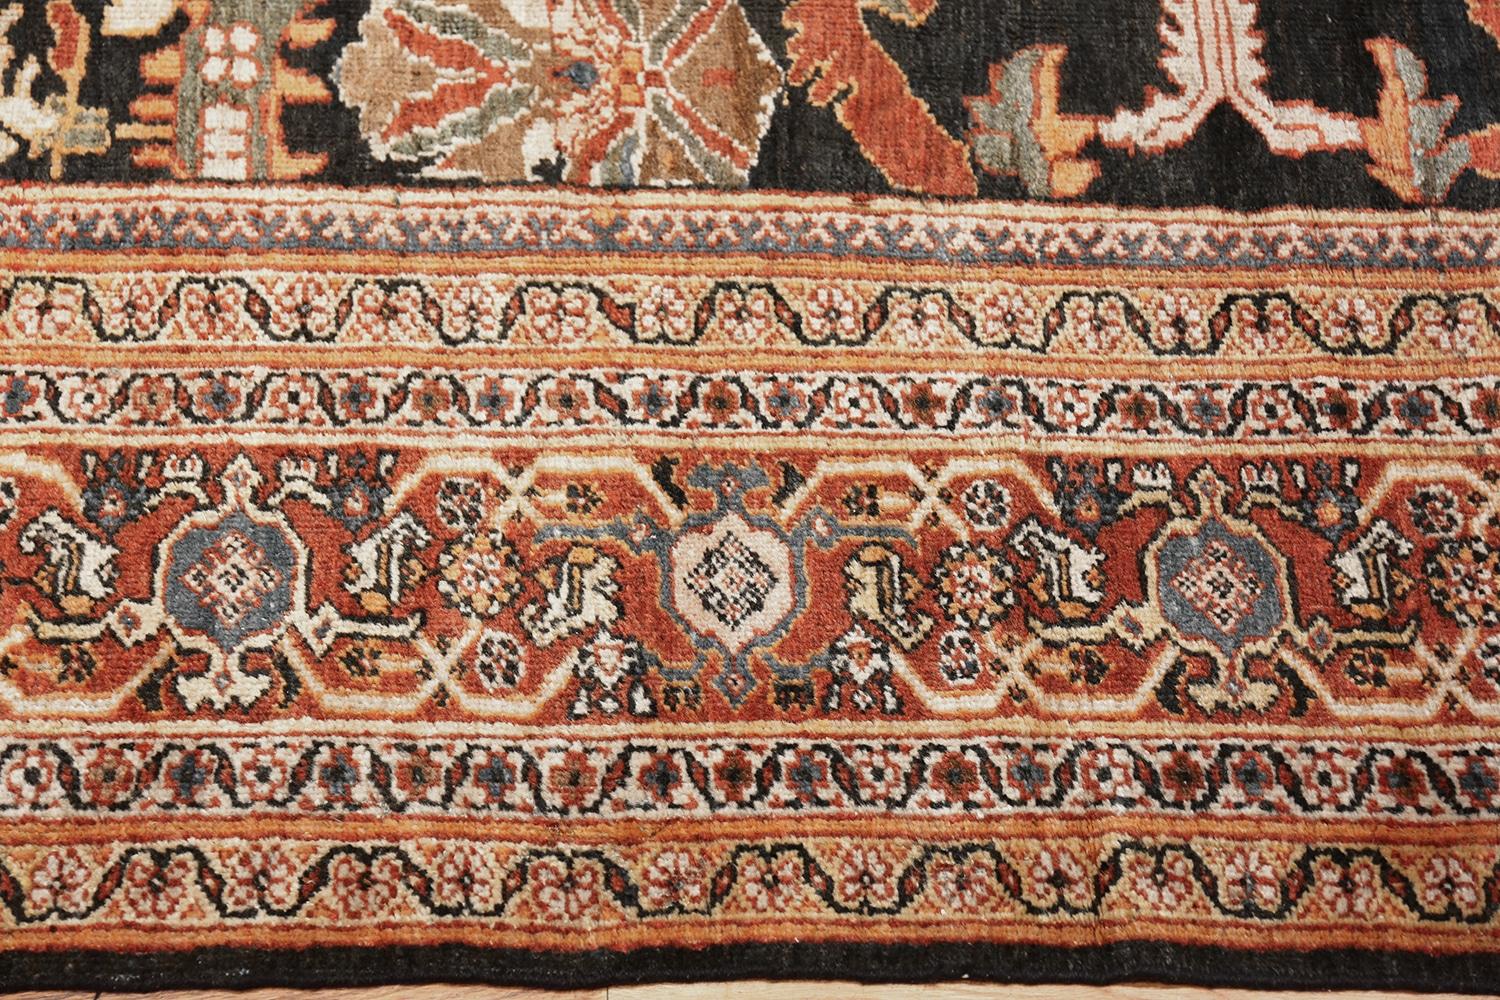 Beautiful large antique Persian Sultanabad rug, country of origin / rug type: antique Persian rugs, circa date: 1900, size: 12 ft x 19 ft 2 in (3.66 m x 5.84 m).